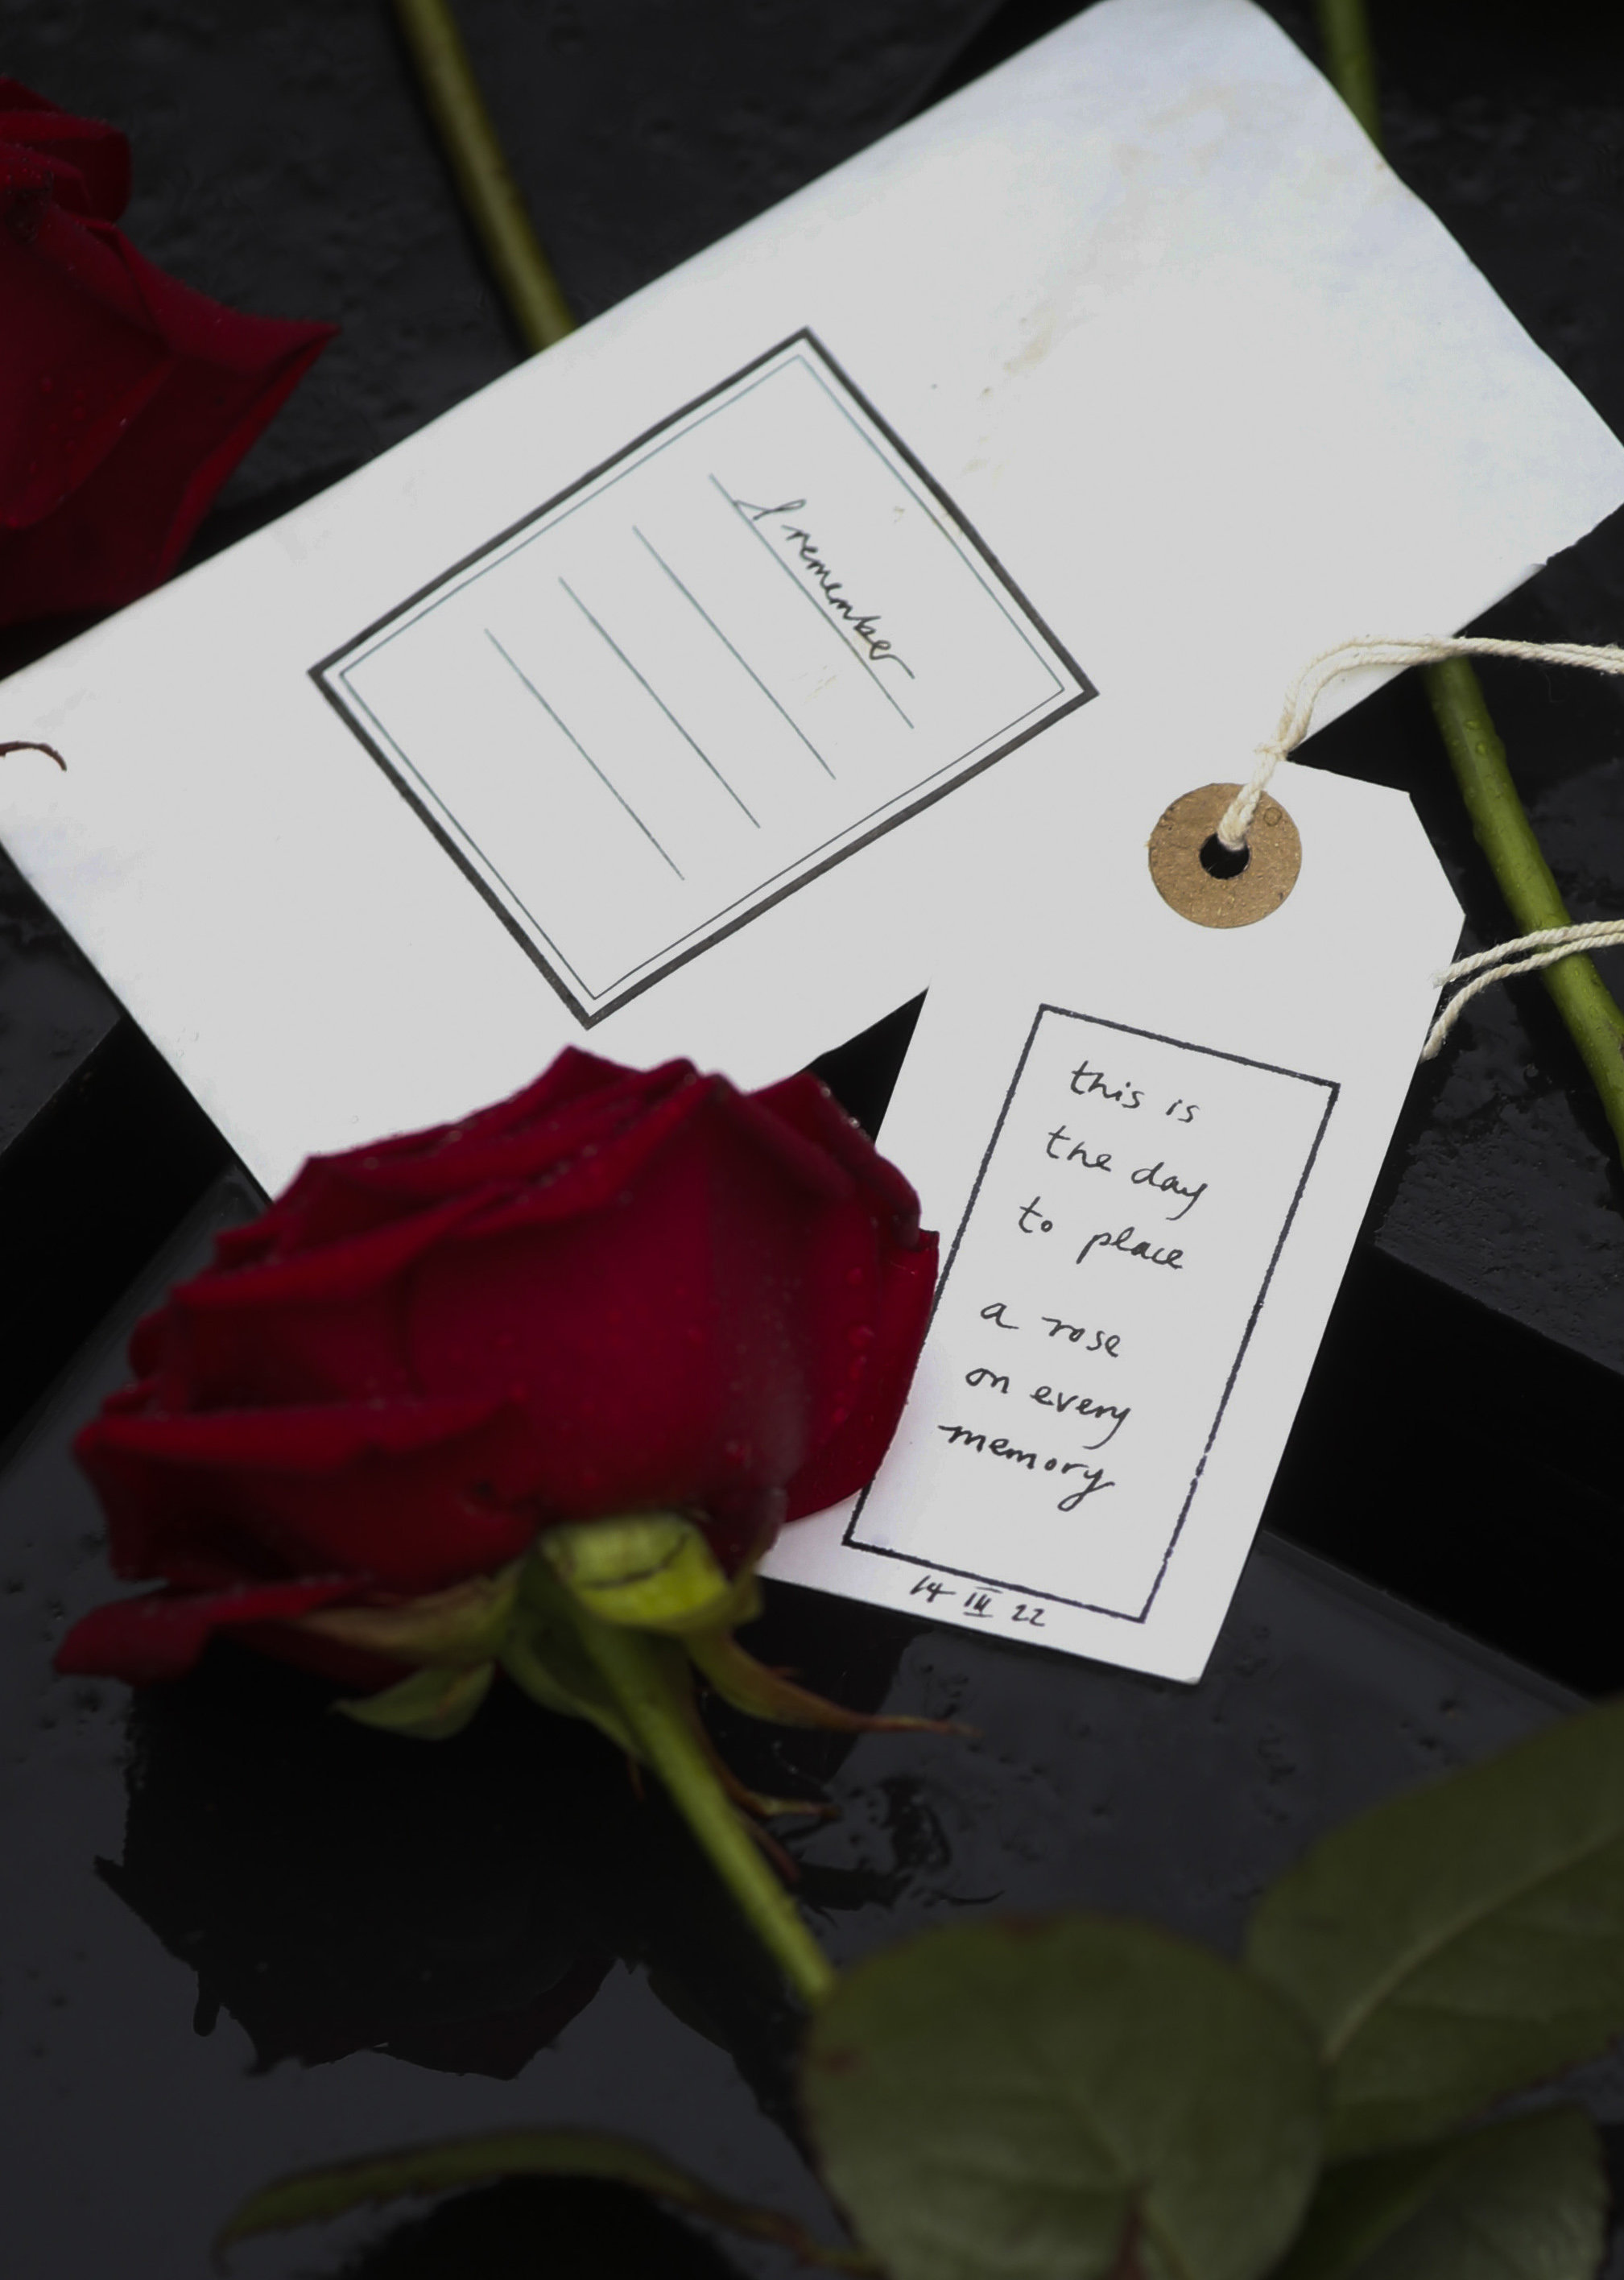 A red rose was placed on a box with I remember messages buried at Pollok Country Park.